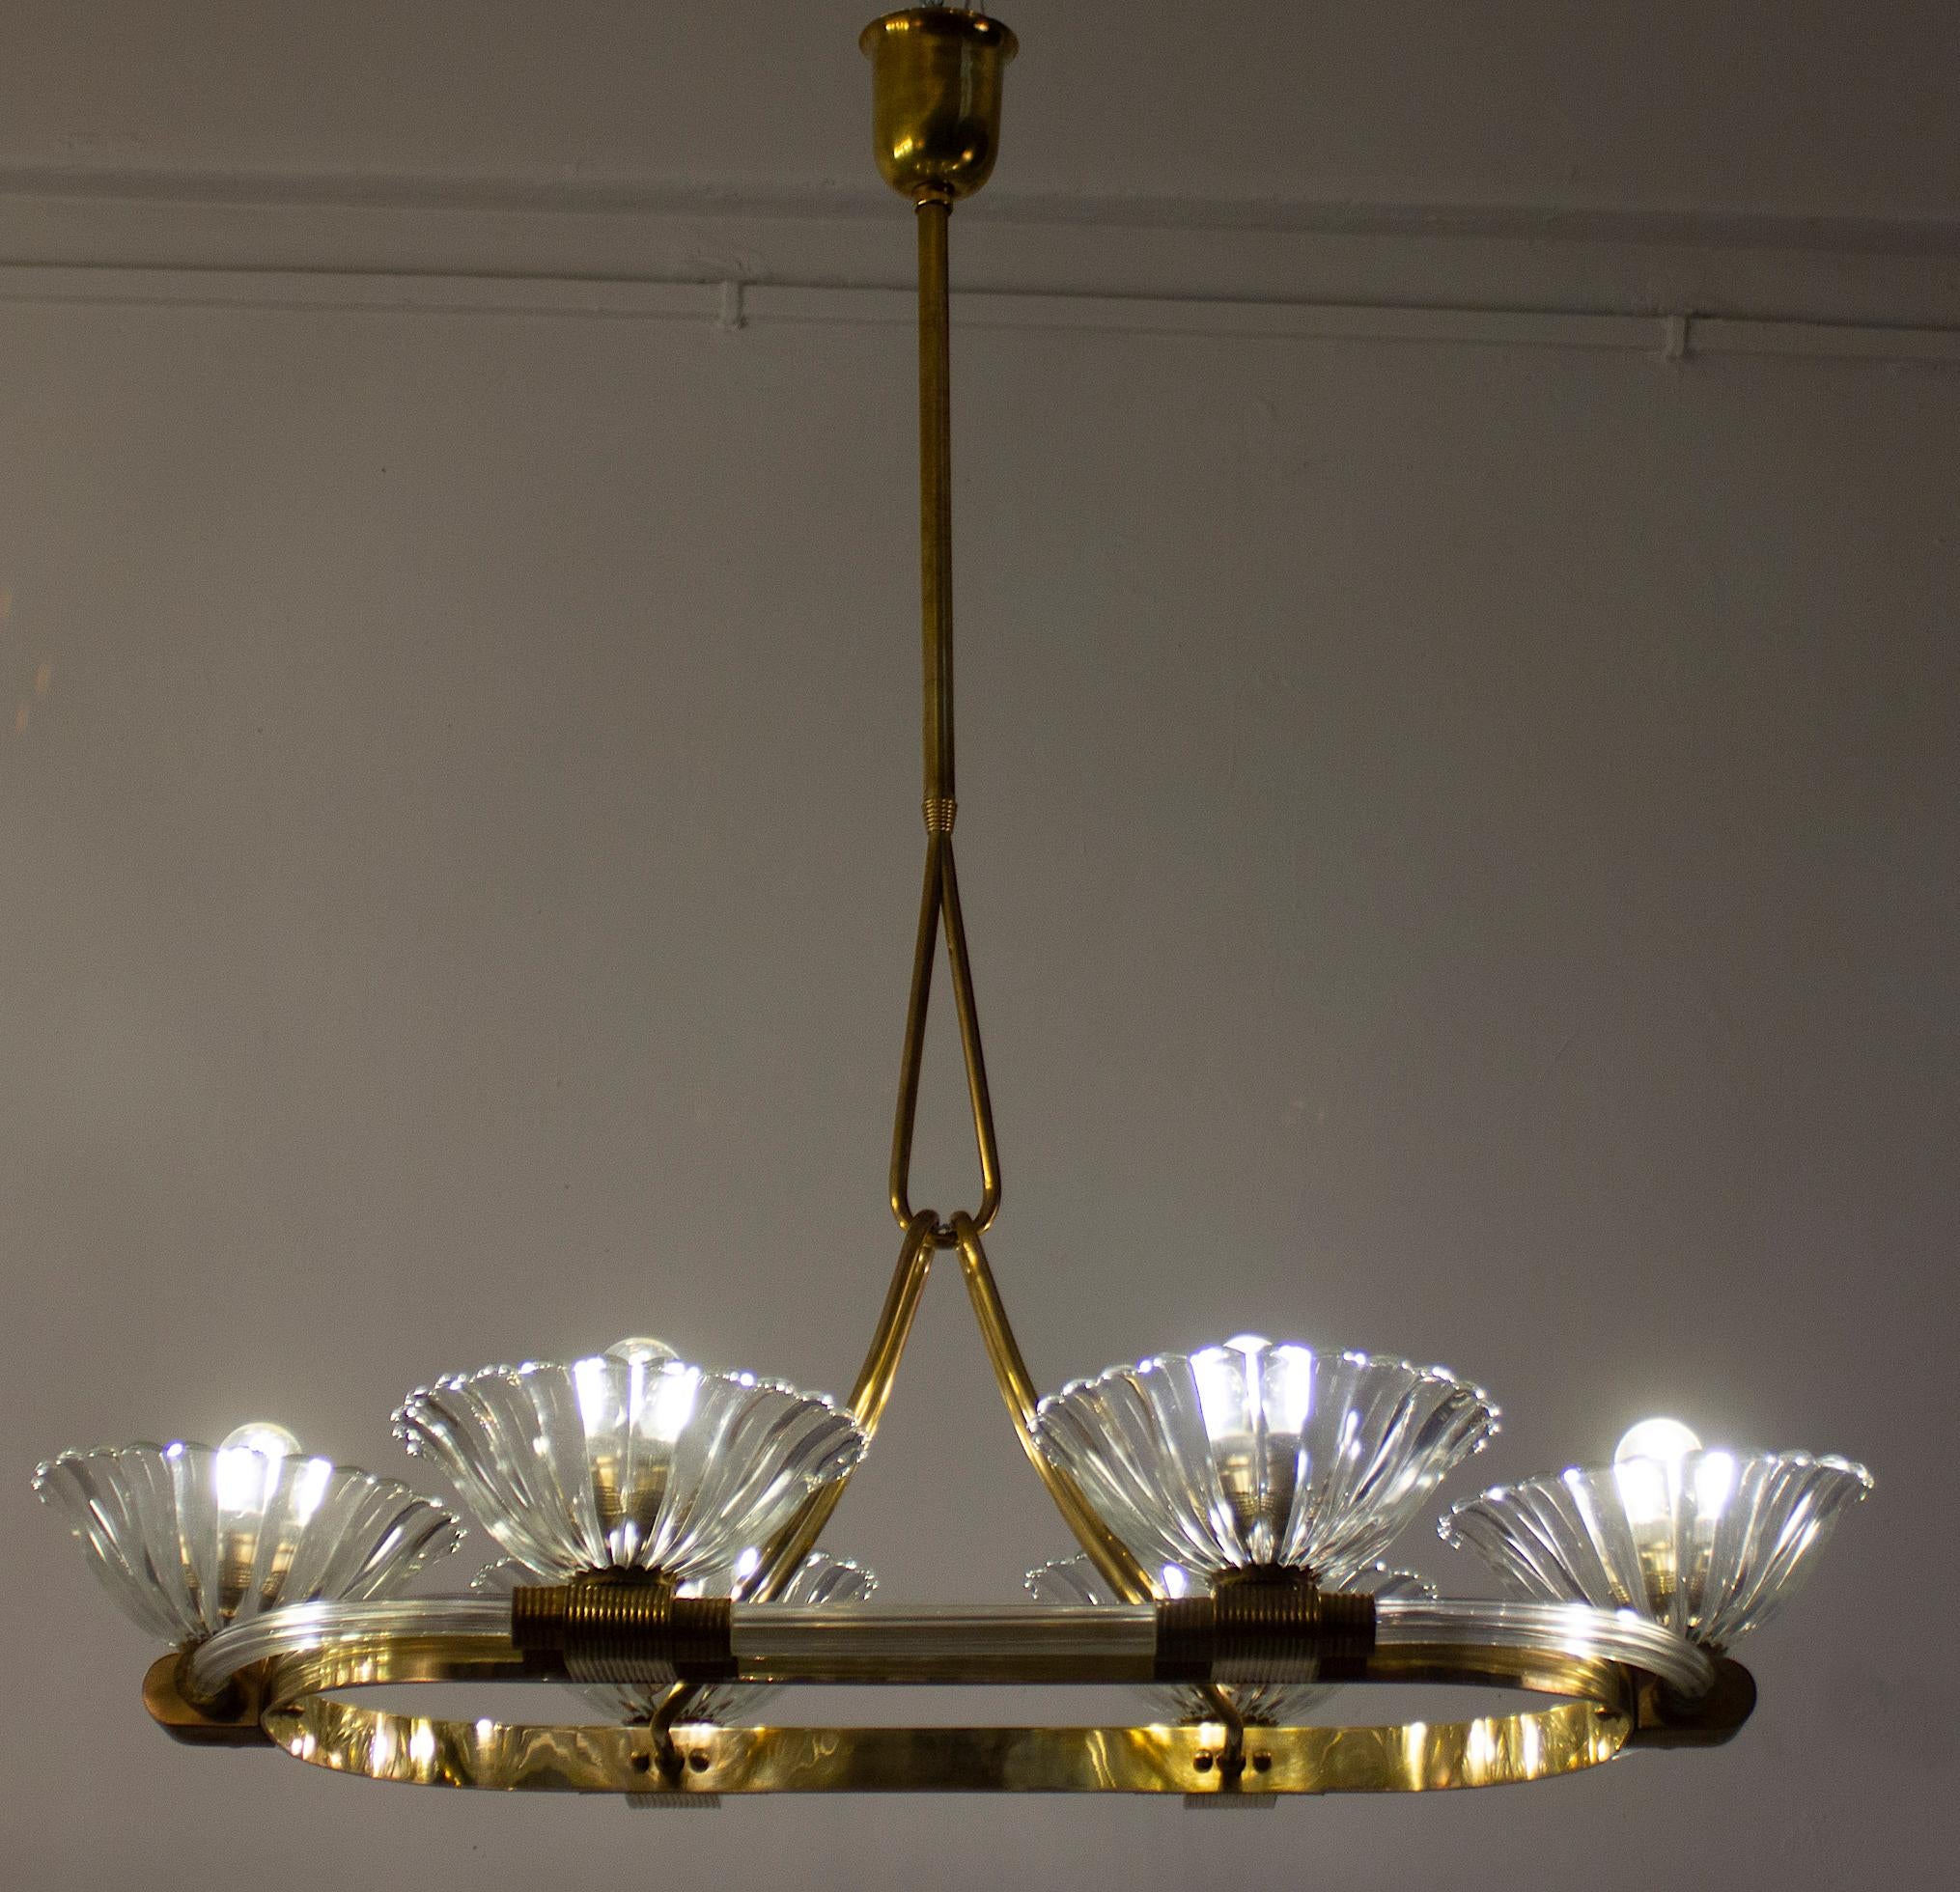  Art Deco Oval Shape Brass and Murano Glass Chandelier by Ercole Barovier 1940 For Sale 6